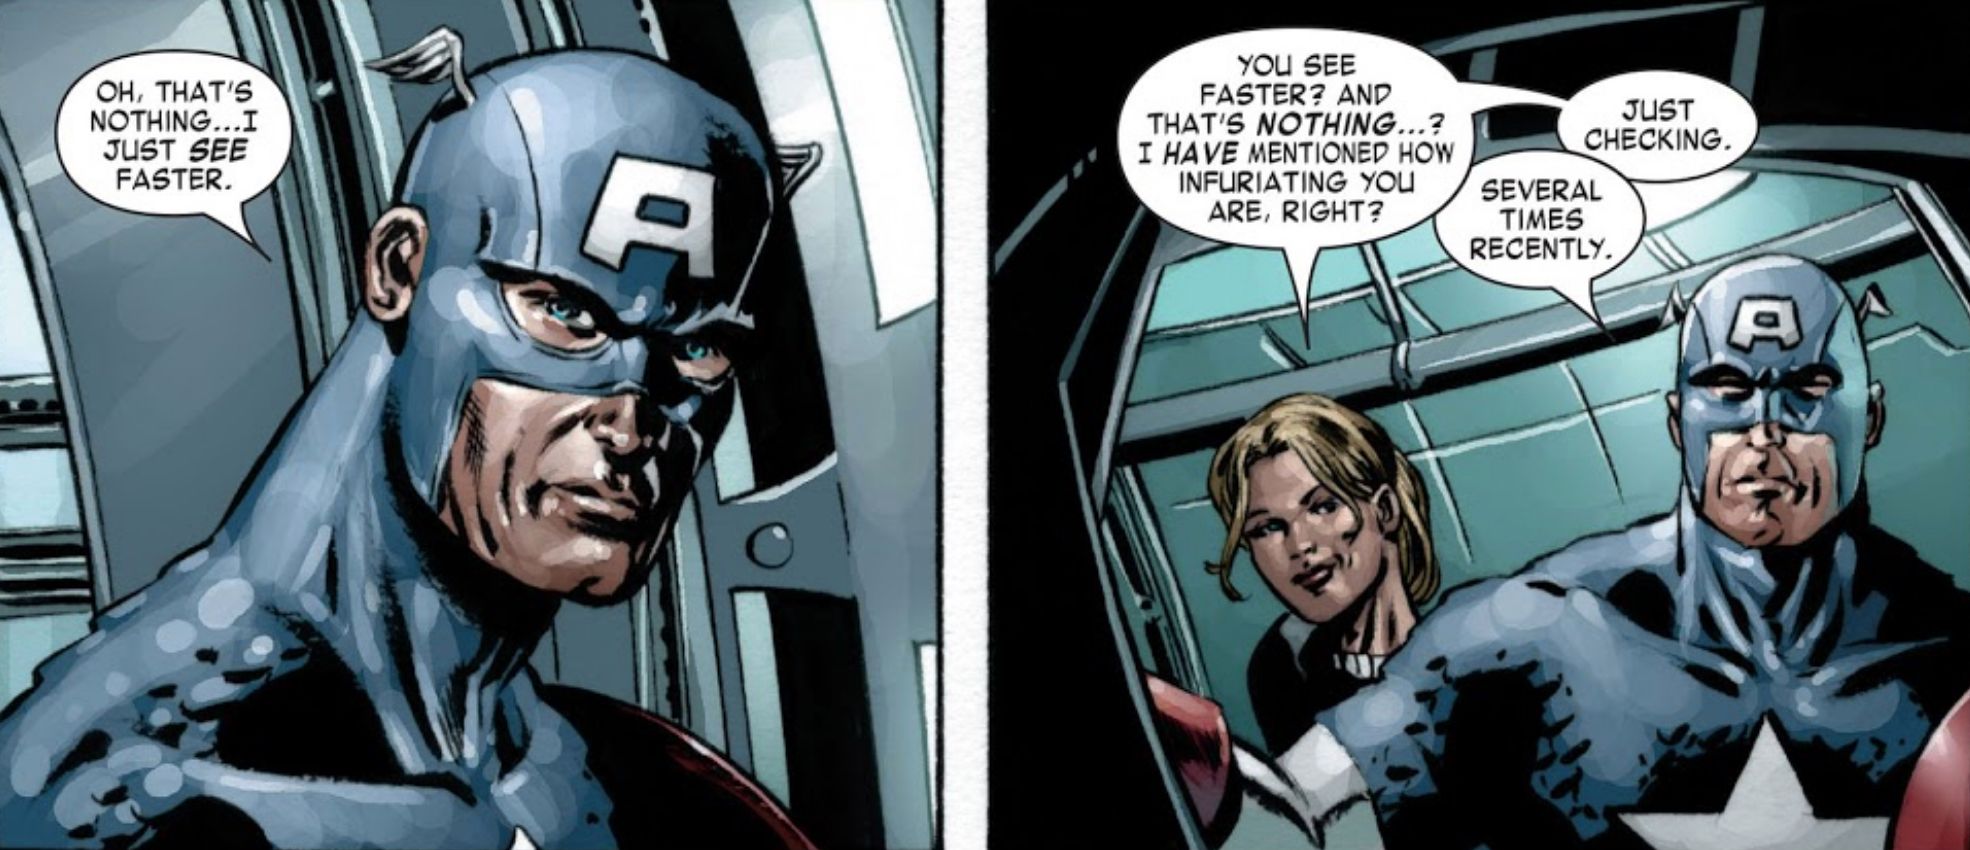 Steve Rogers Sees Faster Than Bullets Move In Captain America Vol 5 Issue 17